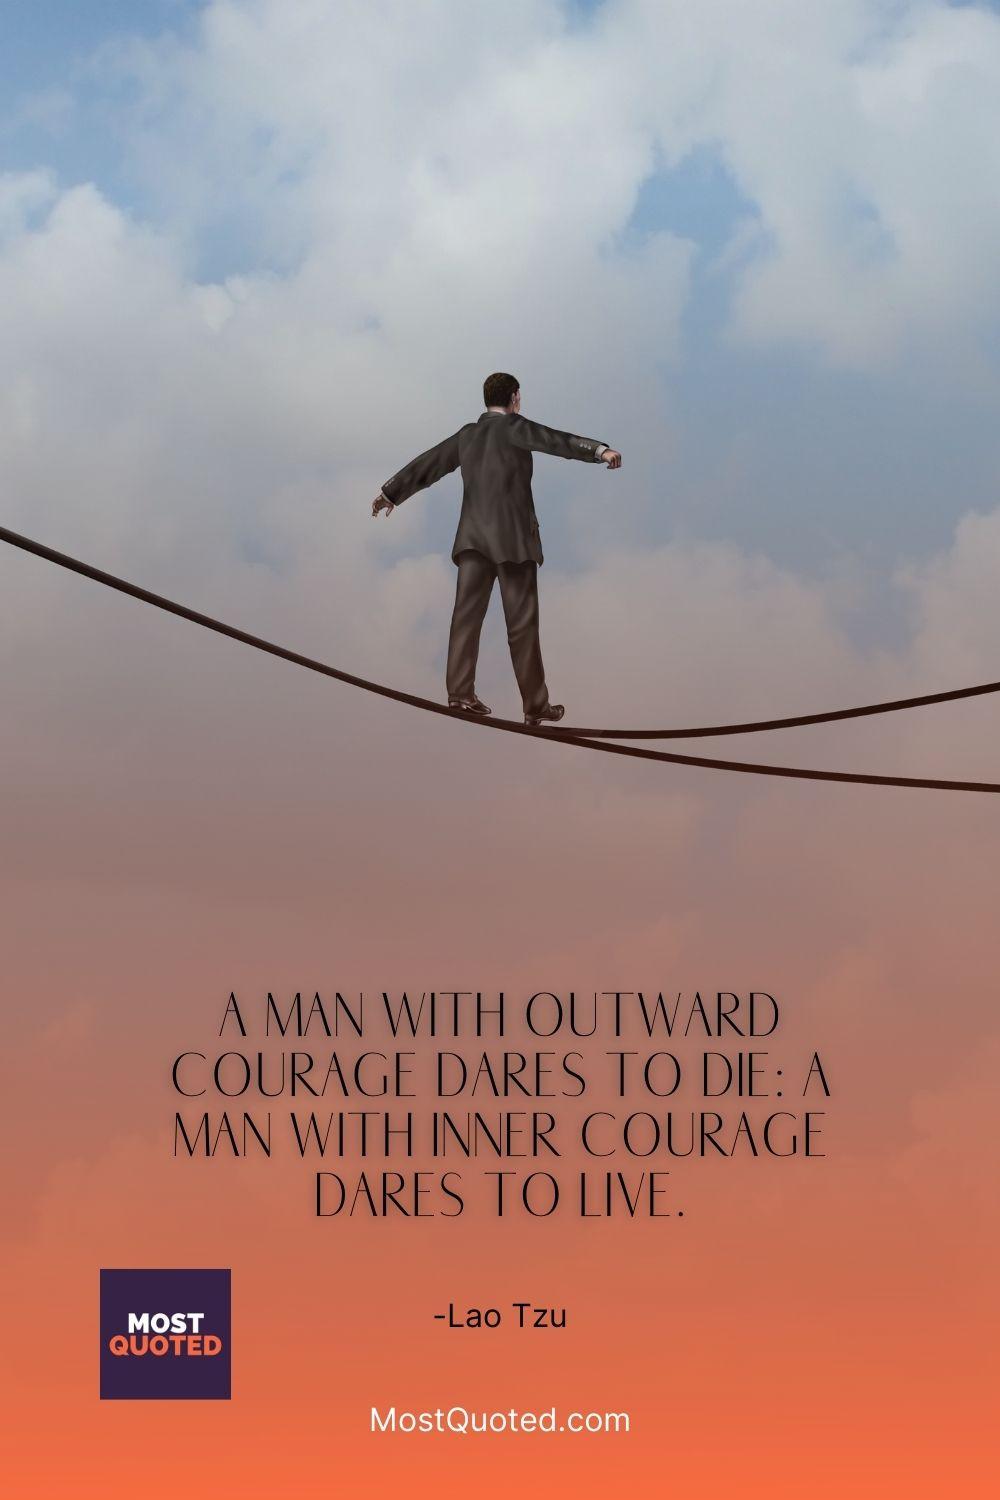 A man with outward courage dares to die: a man with inner courage dares to live. - Lao Tzu